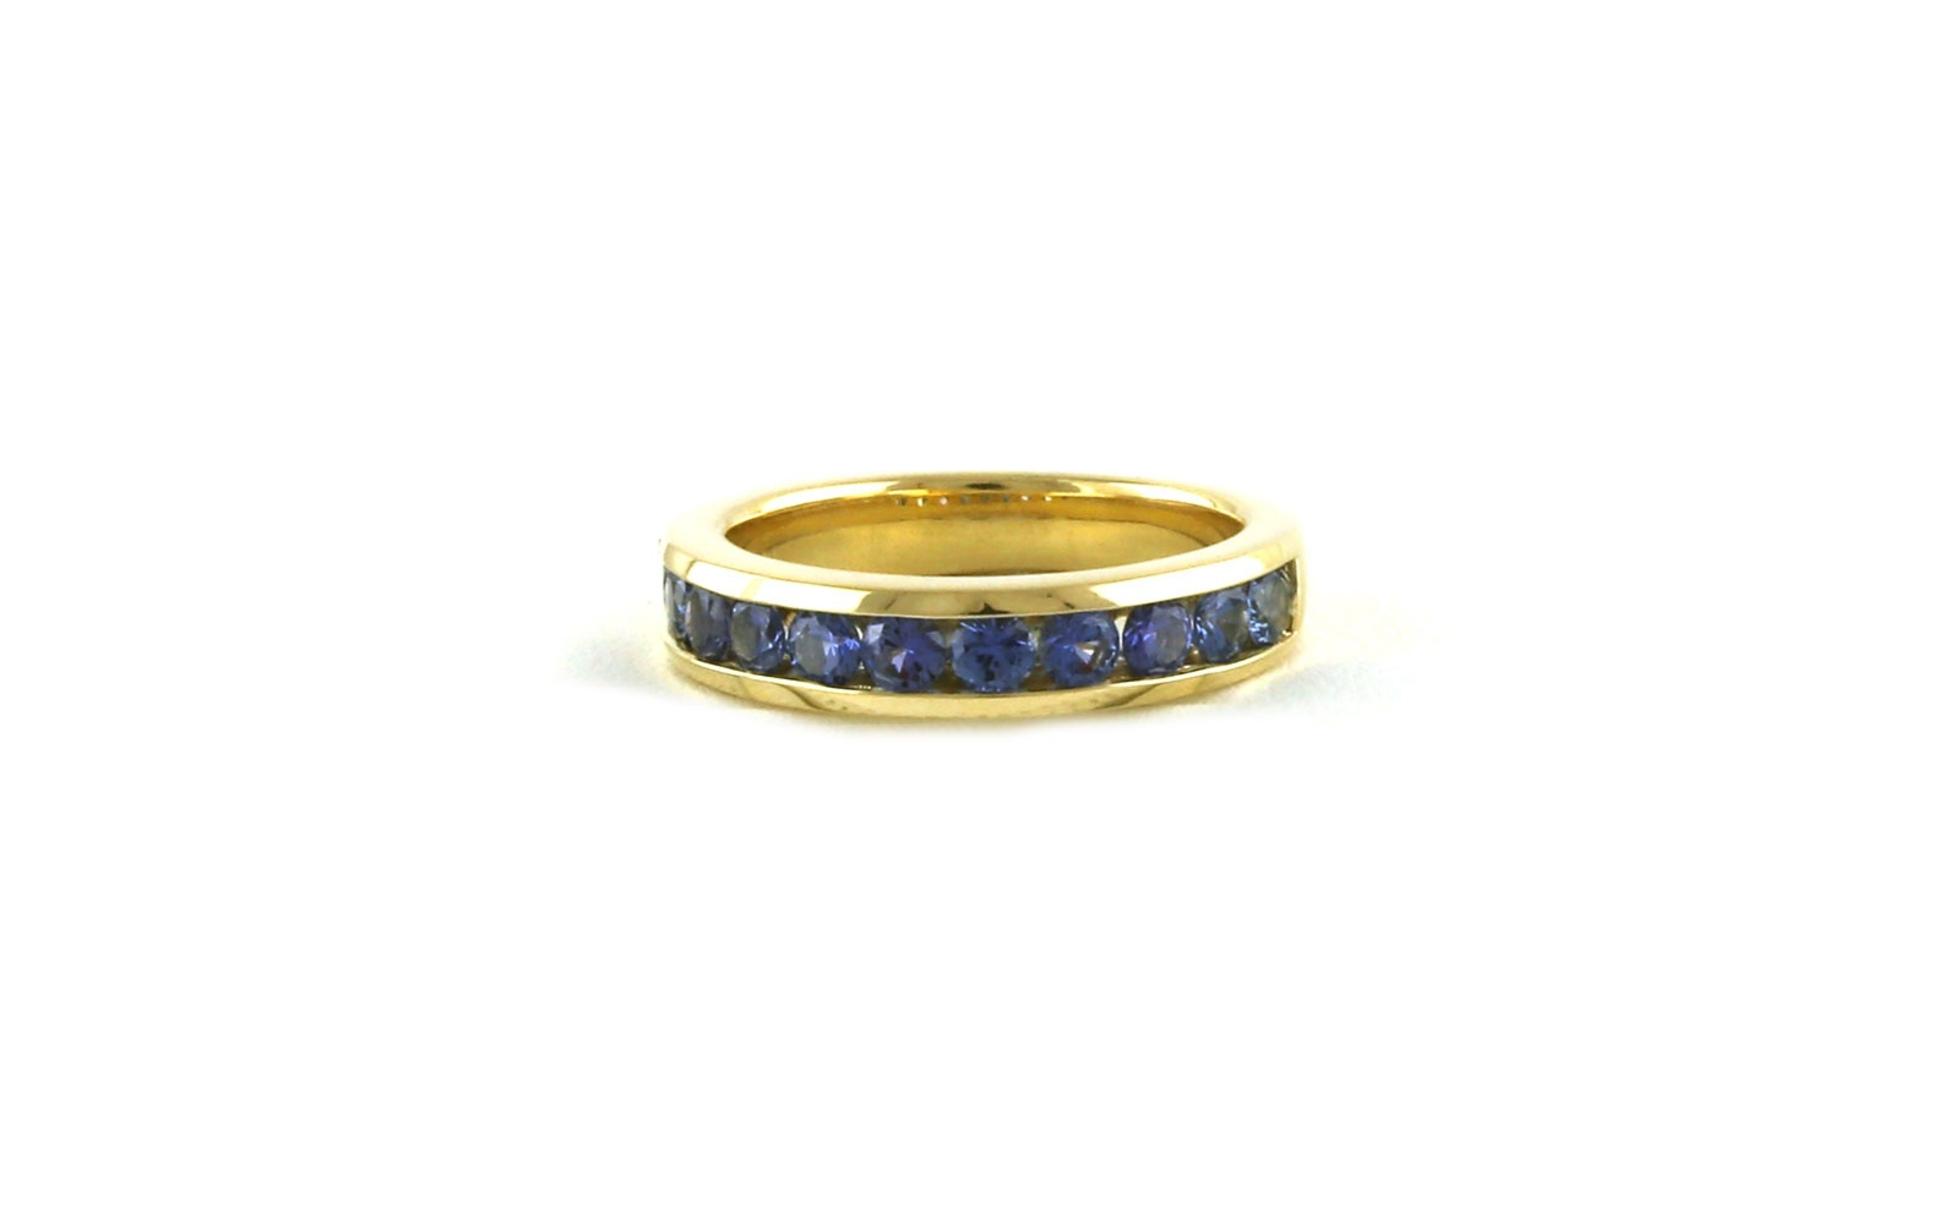 11-Stone Channel-set Montana Yogo Sapphire Band in Yellow Gold (1.10cts TWT)